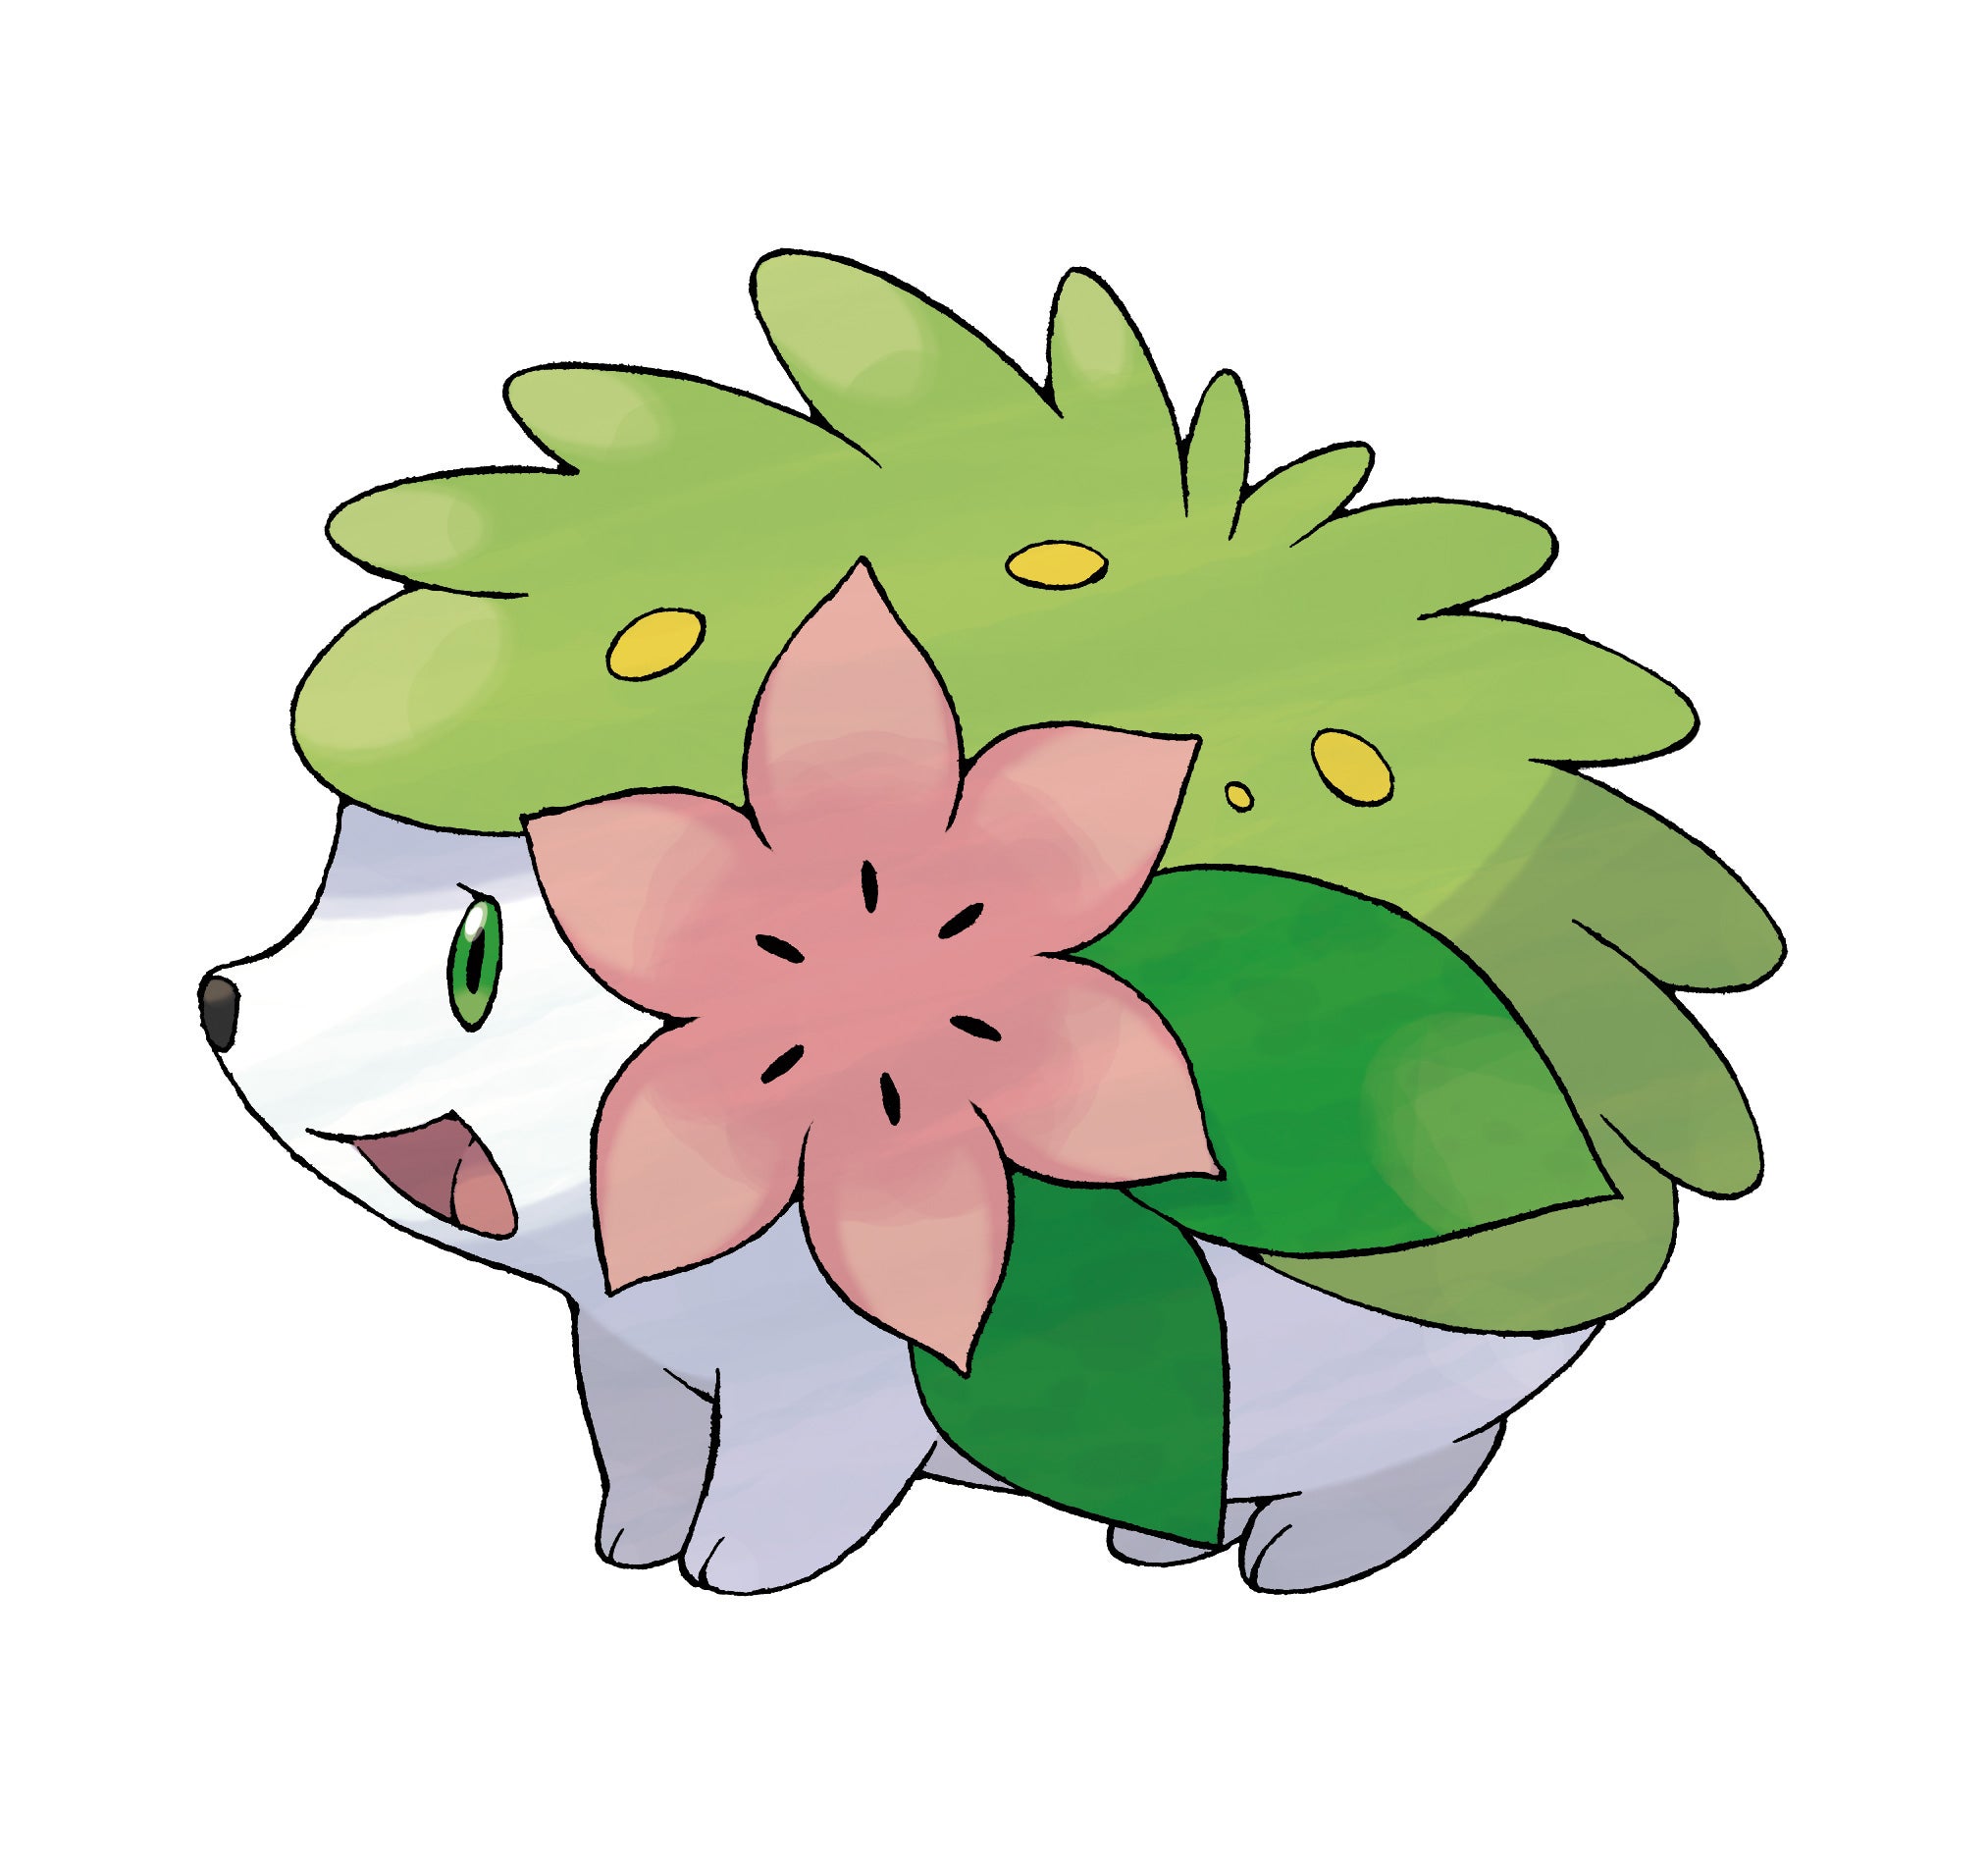 Image for Mythical Pokemon Shaymin now available through Nintendo Network